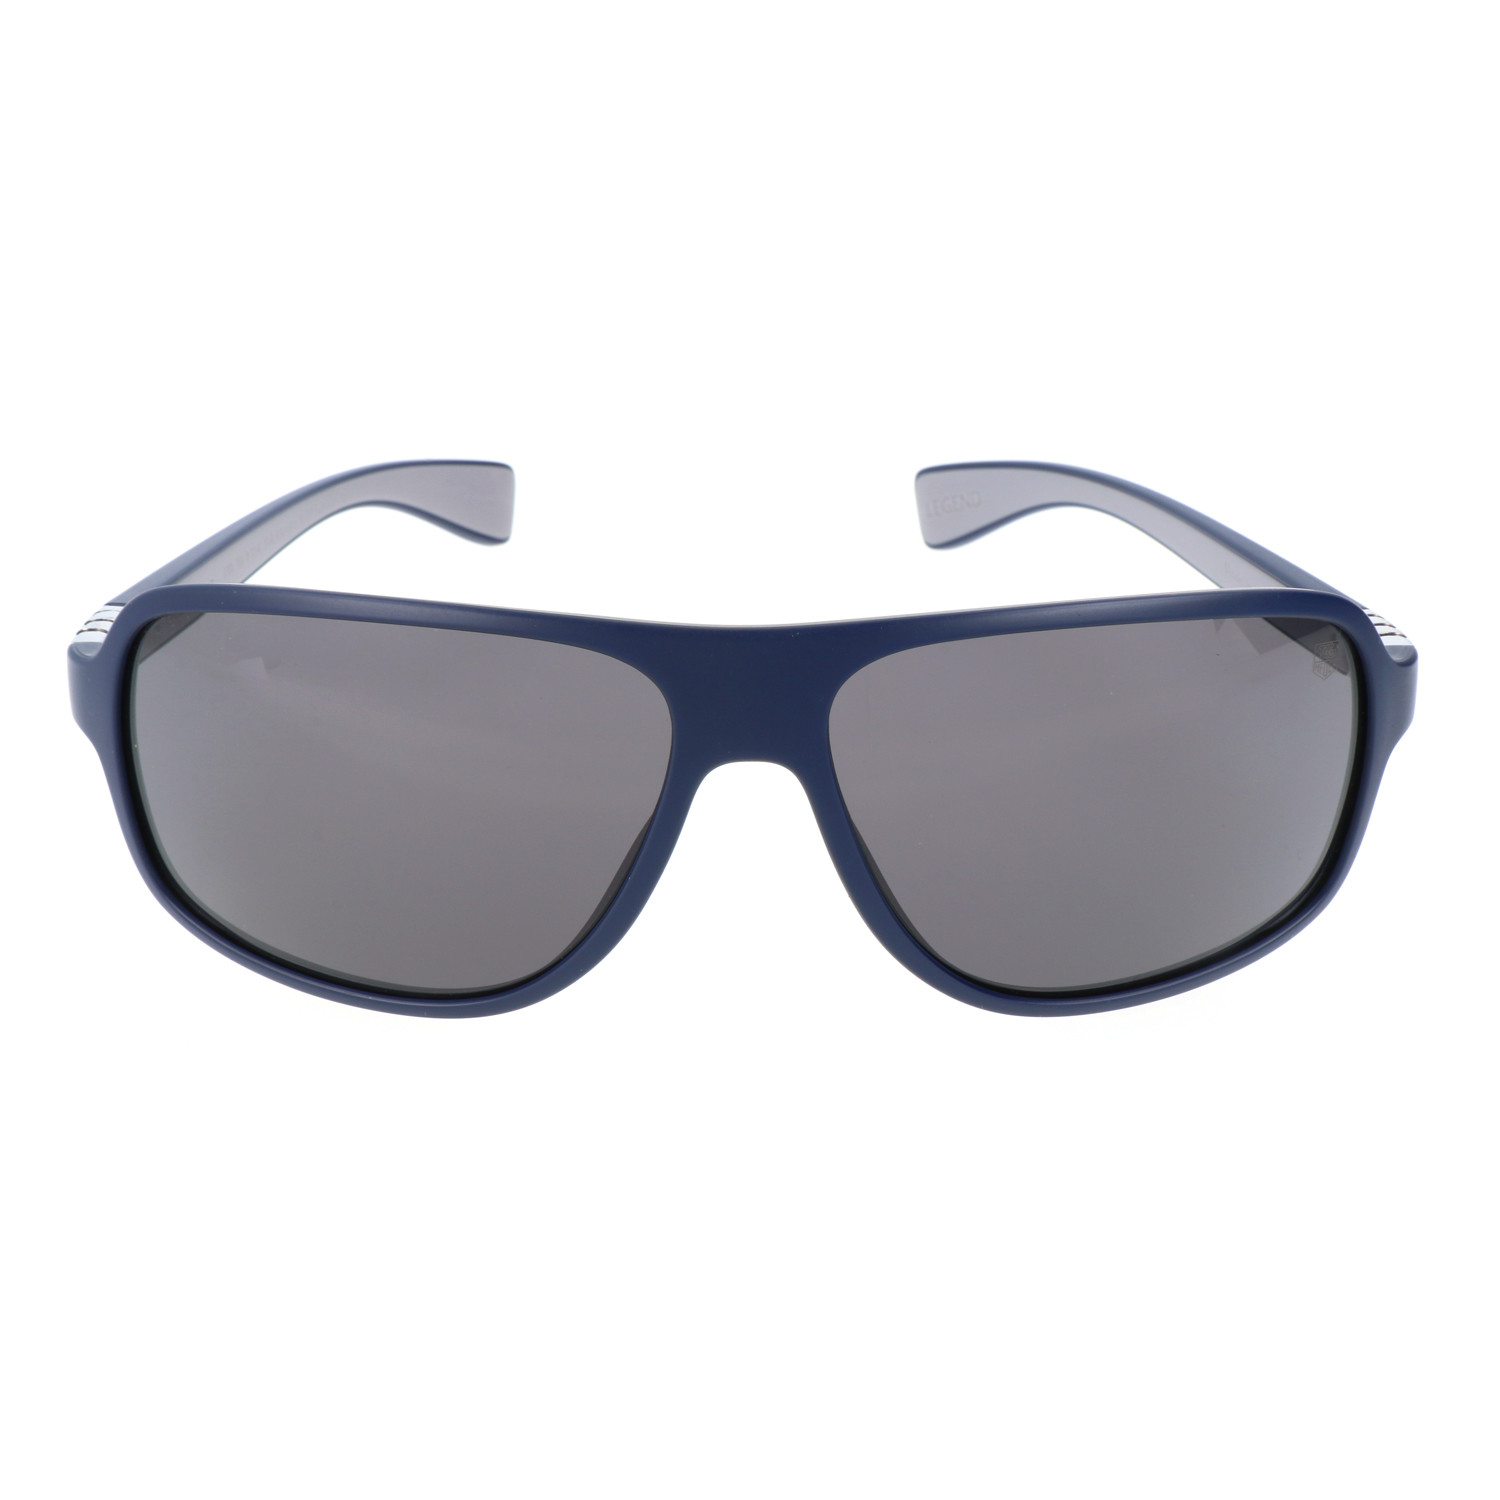 Mandel Sunglasses // Navy Blue + Grey - Clearance: Fashion Accessories ...